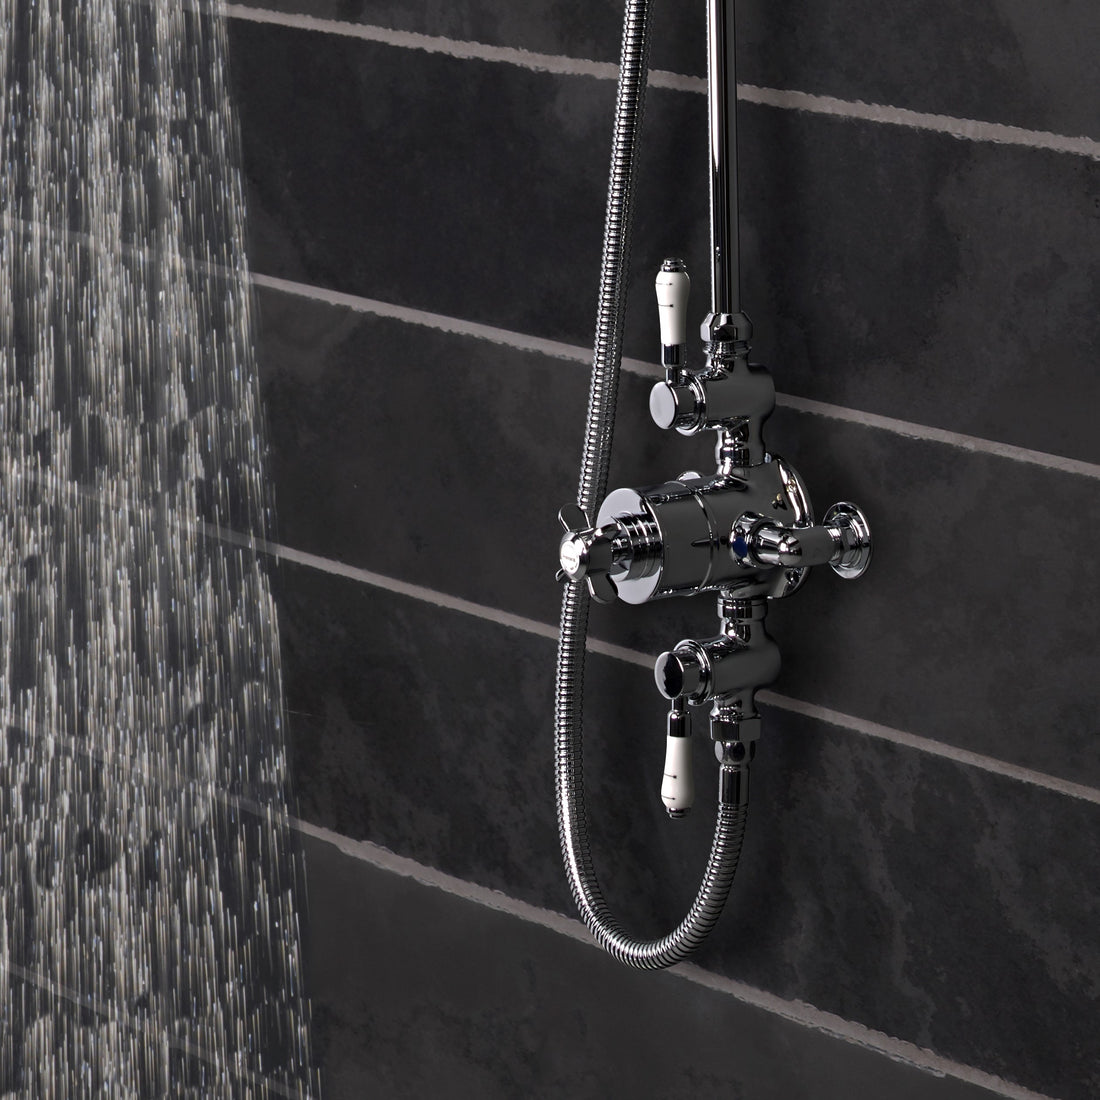 Tavistock Varsity Exposed Dual Function Shower System - Chrome close up view of the shower controls against grey tiling SVA1712